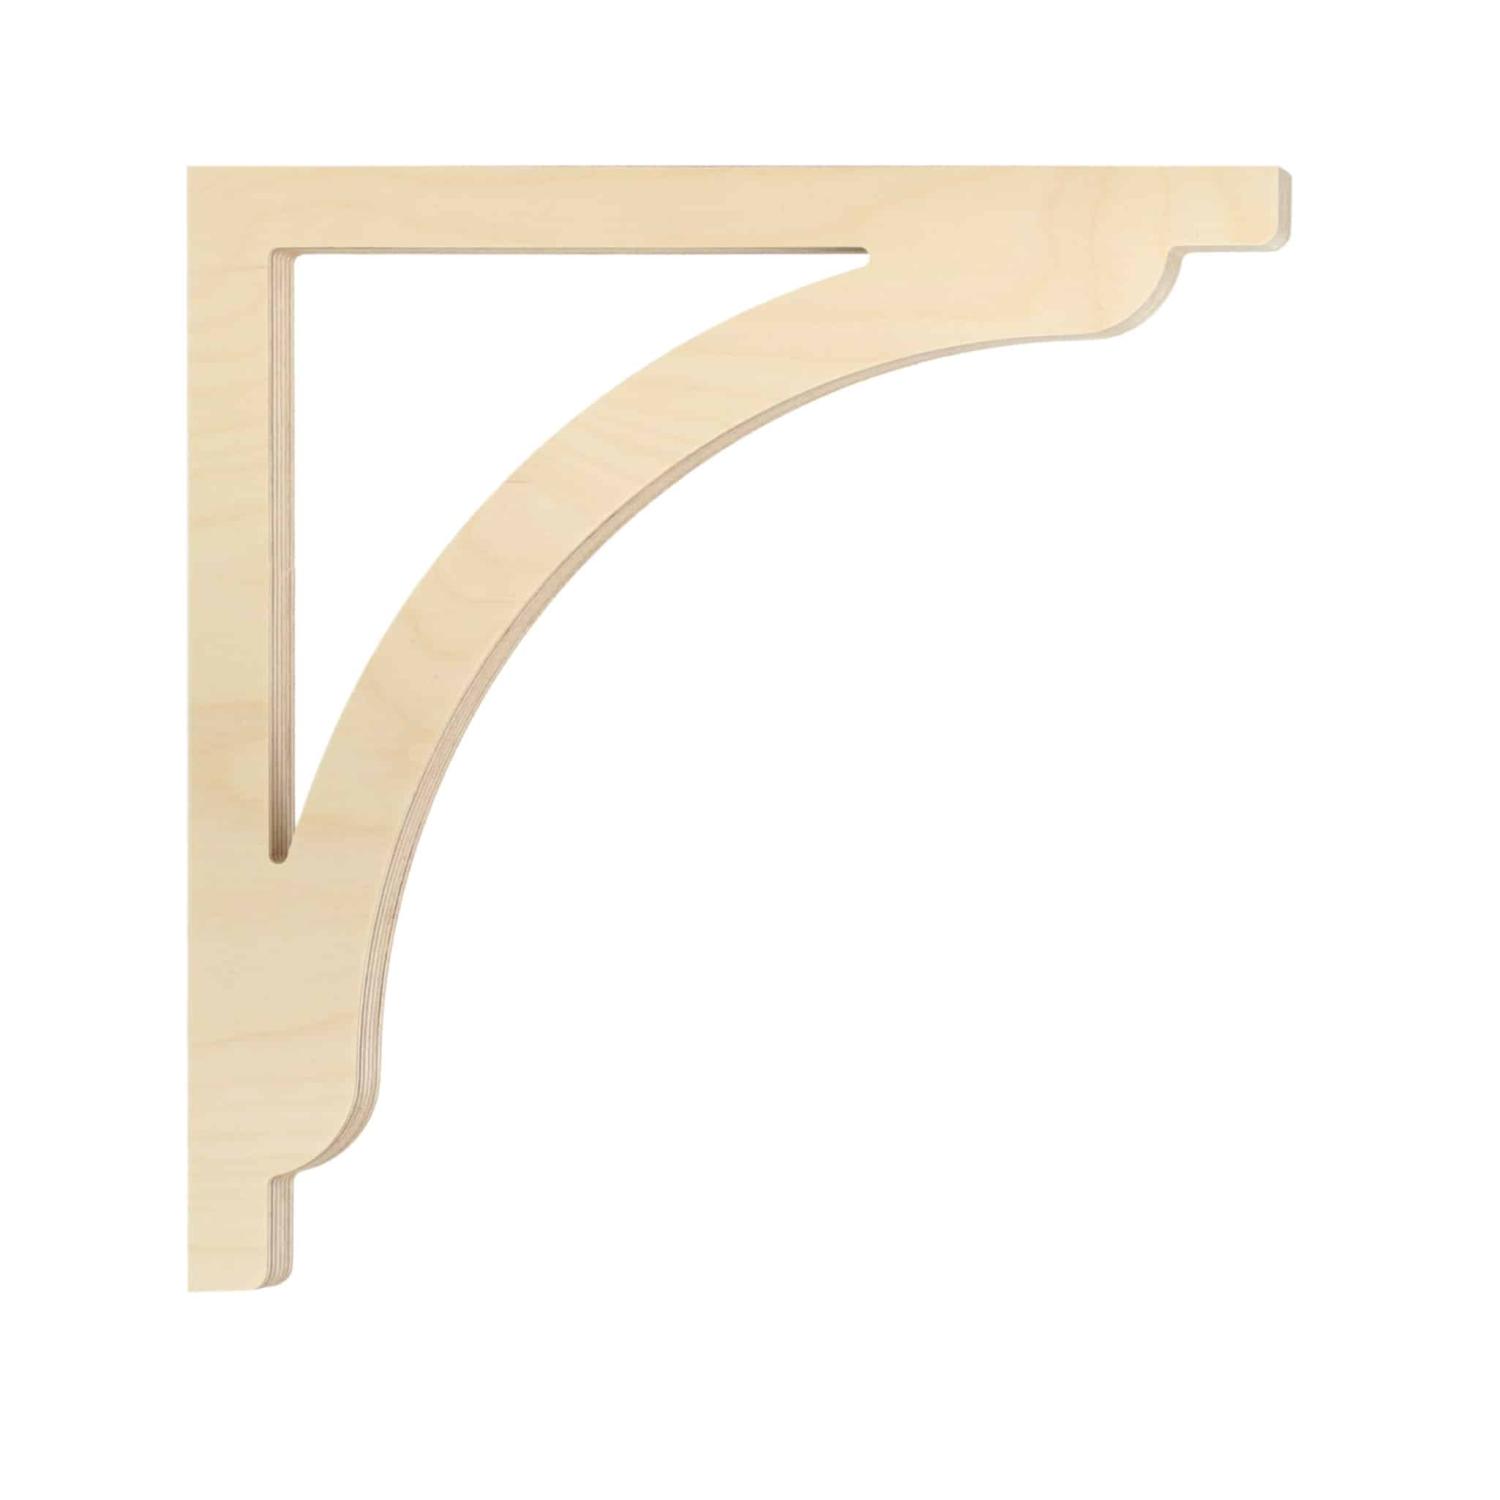 Bracket 017 - A classic wooden corbel & bracket with ornaments for porch, portico and veranda.